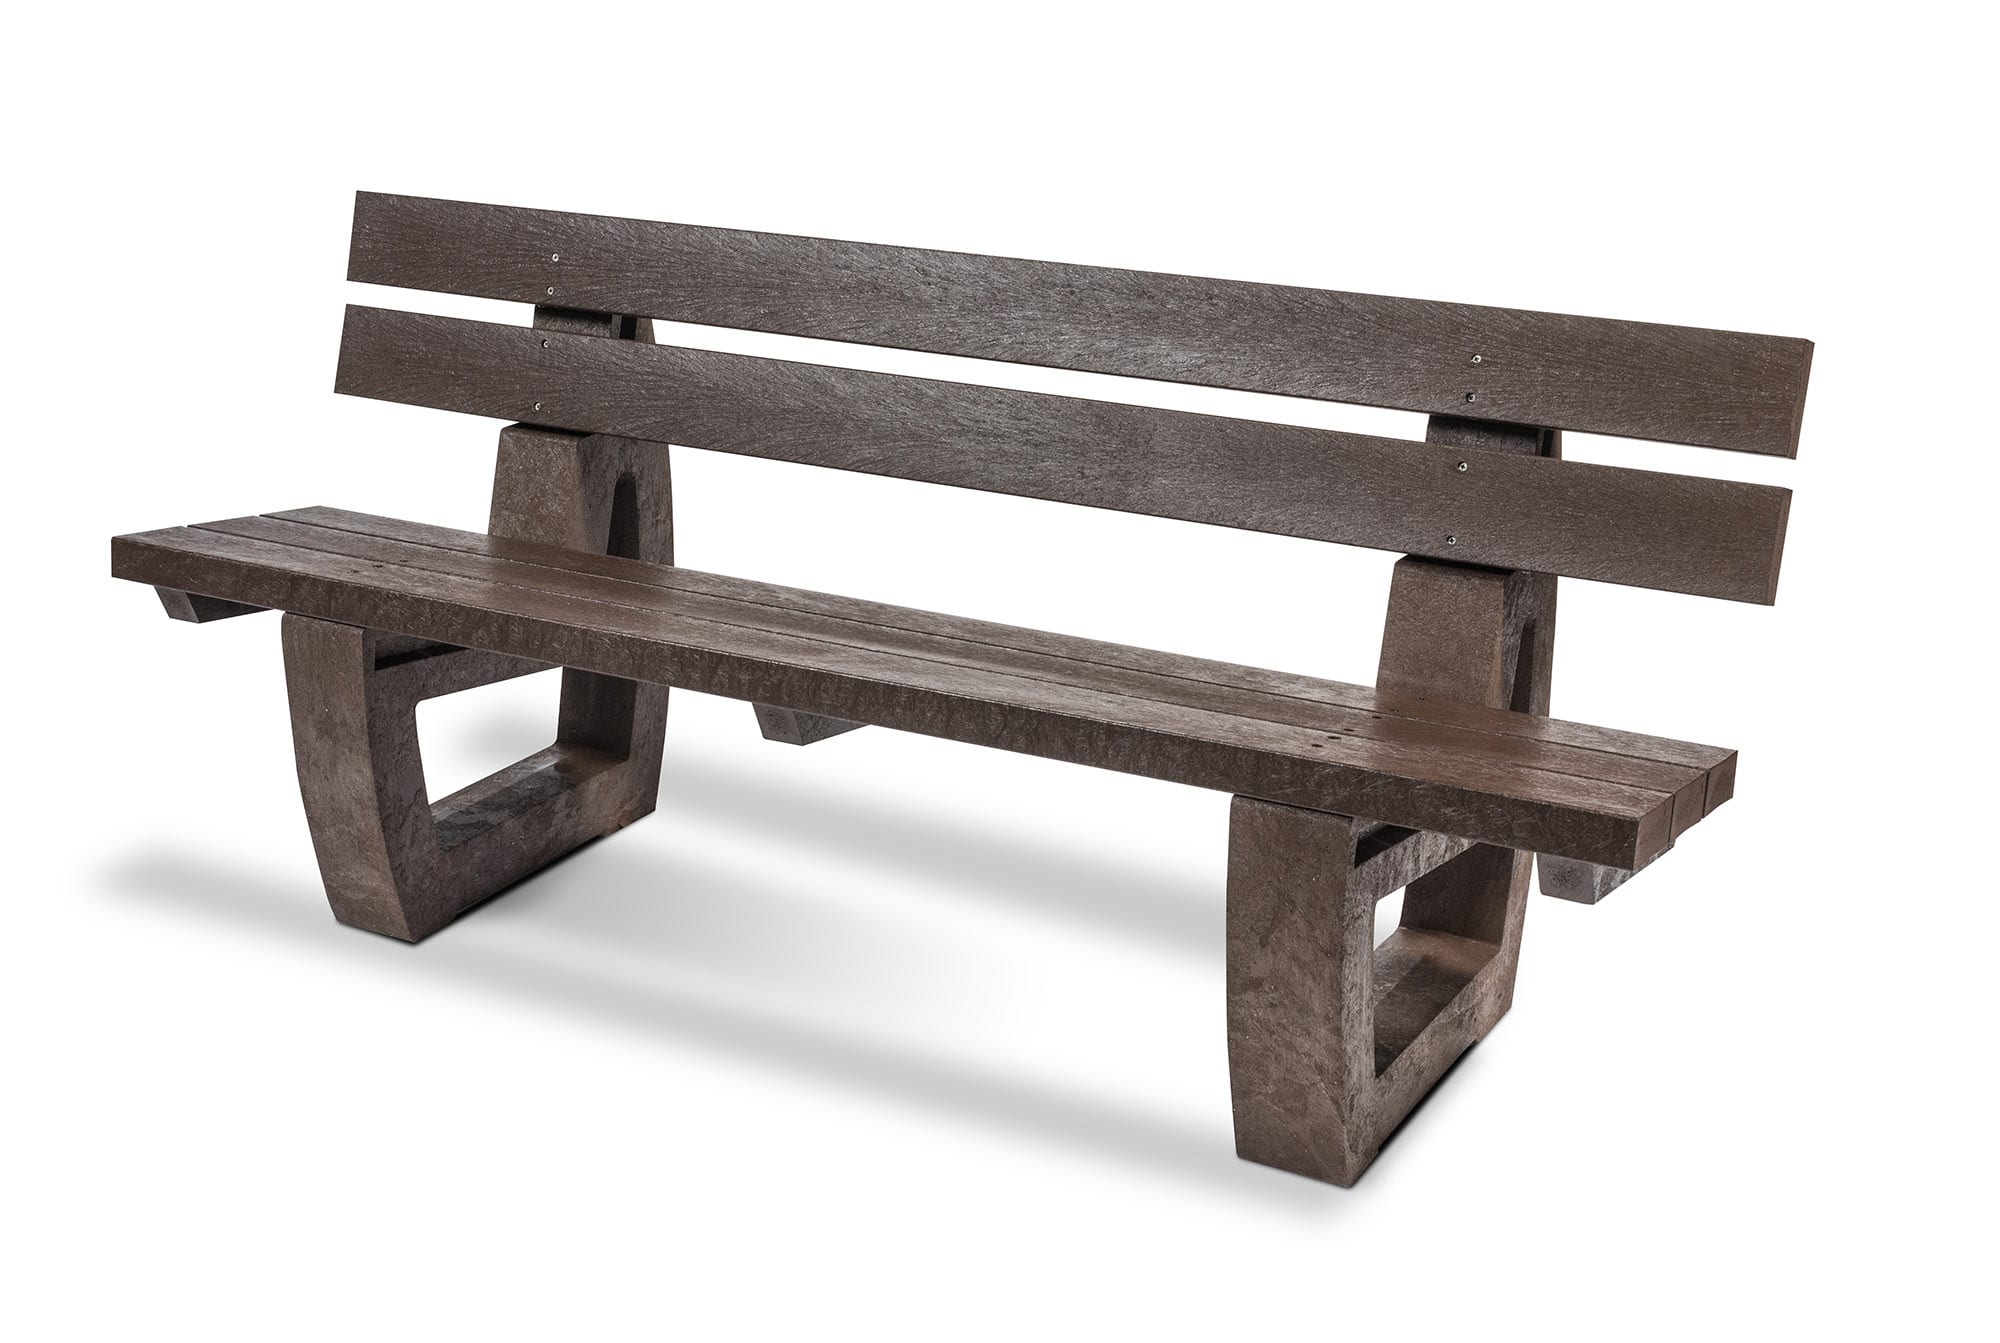 A 1800mm recycled plastic Harewood bench in brown